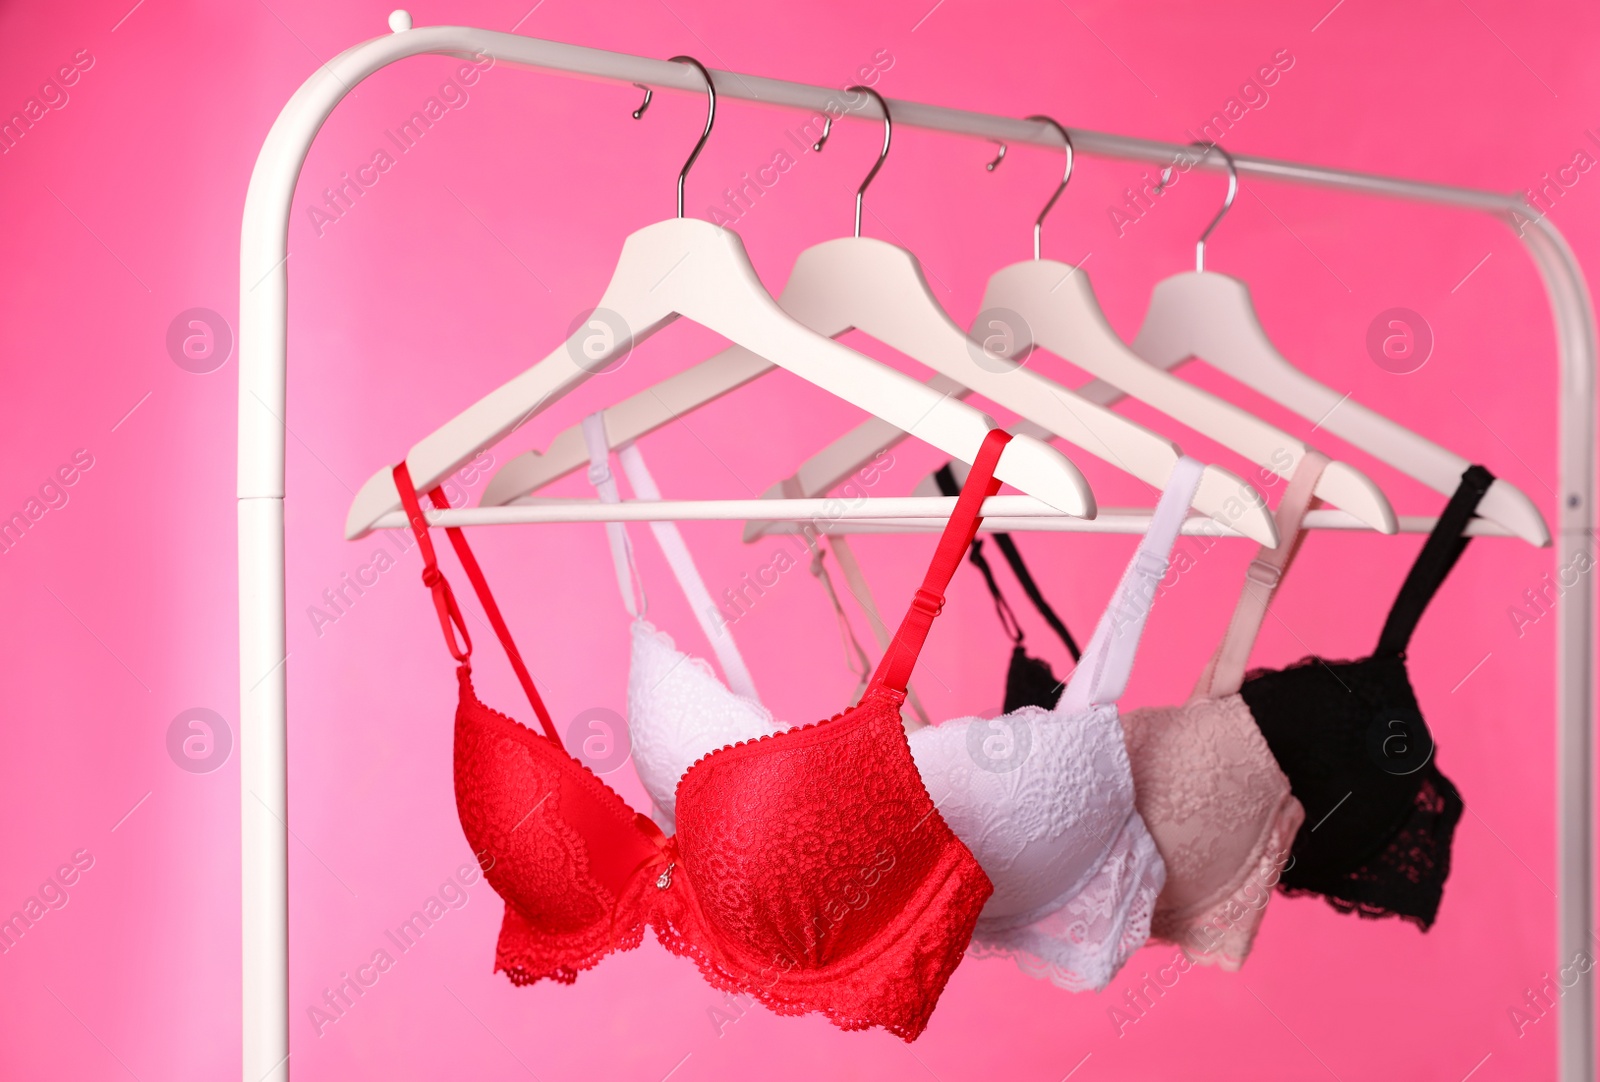 Photo of Hangers with beautiful lace bras on rack against pink background. Stylish underwear